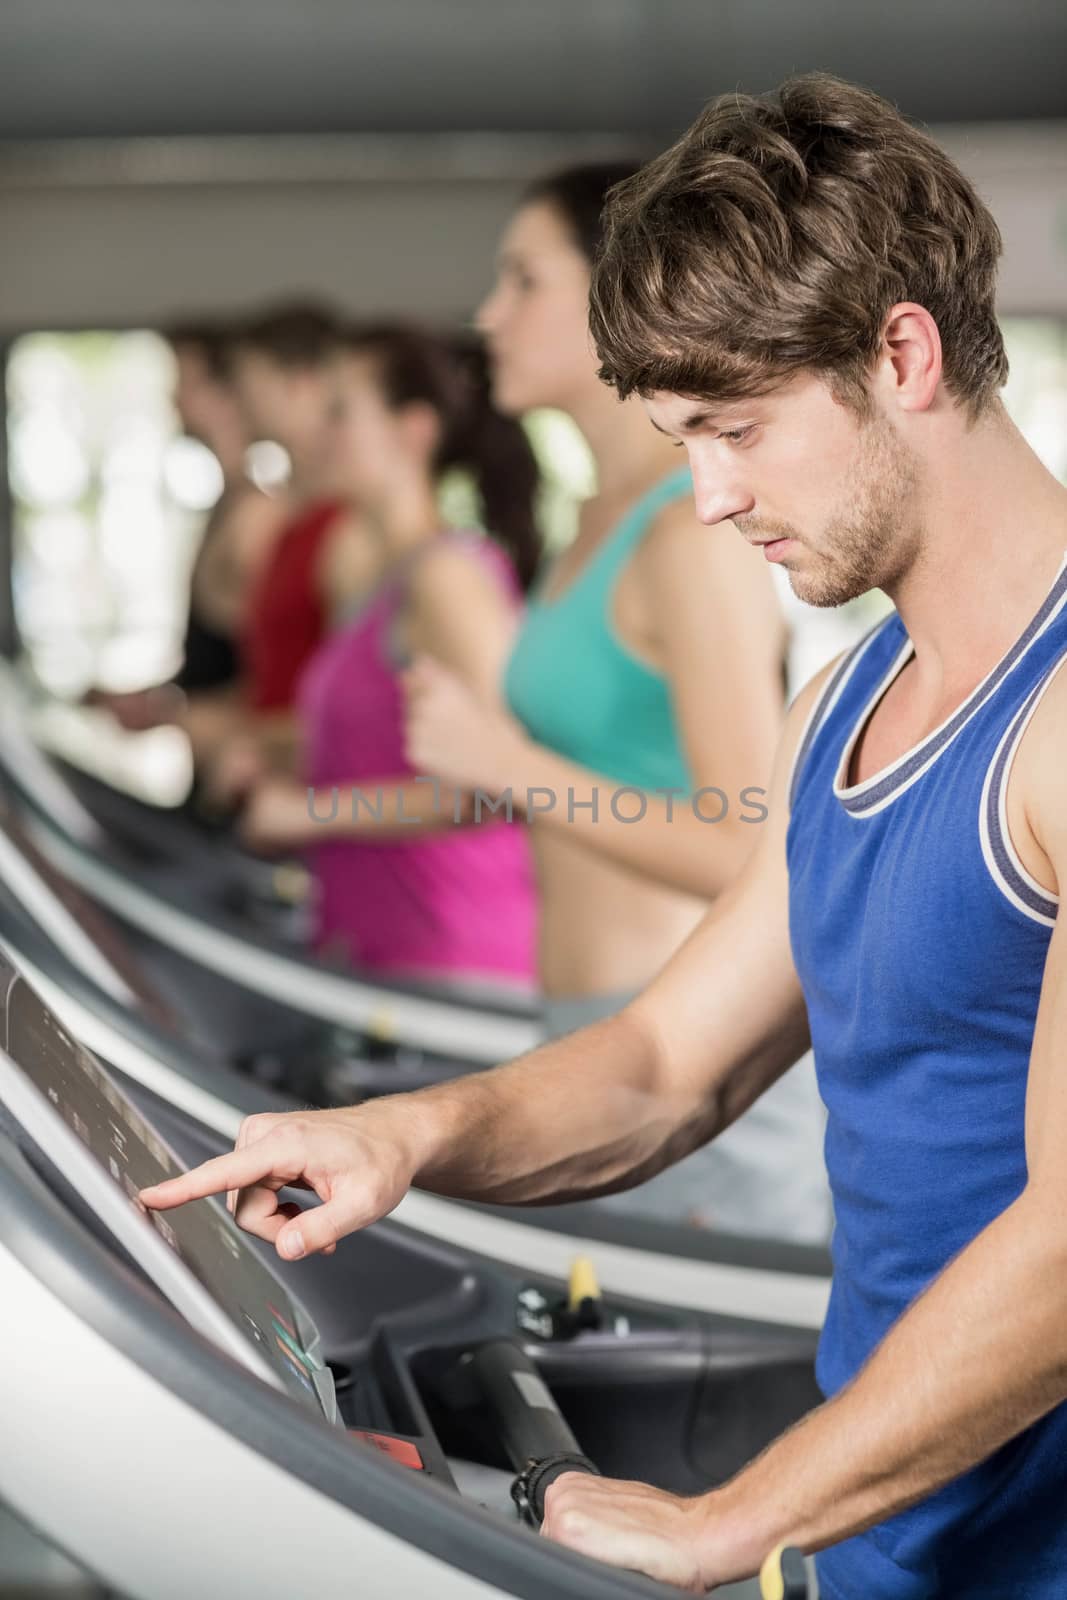 Smiling muscular man on treadmill at gym 